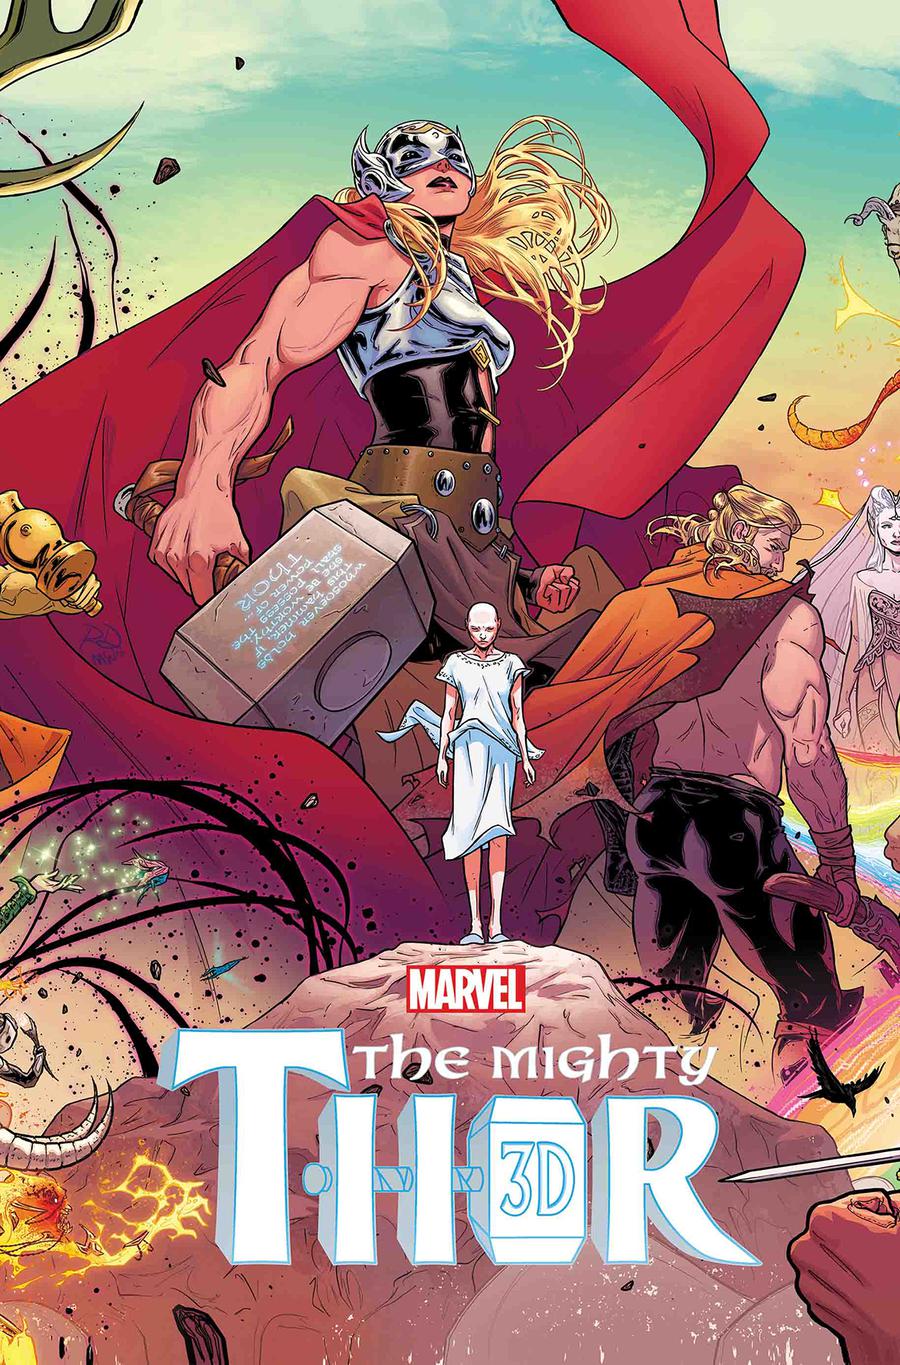 Mighty Thor 3D #1 Cover A With Polybag (War Of The Realms Tie-In)